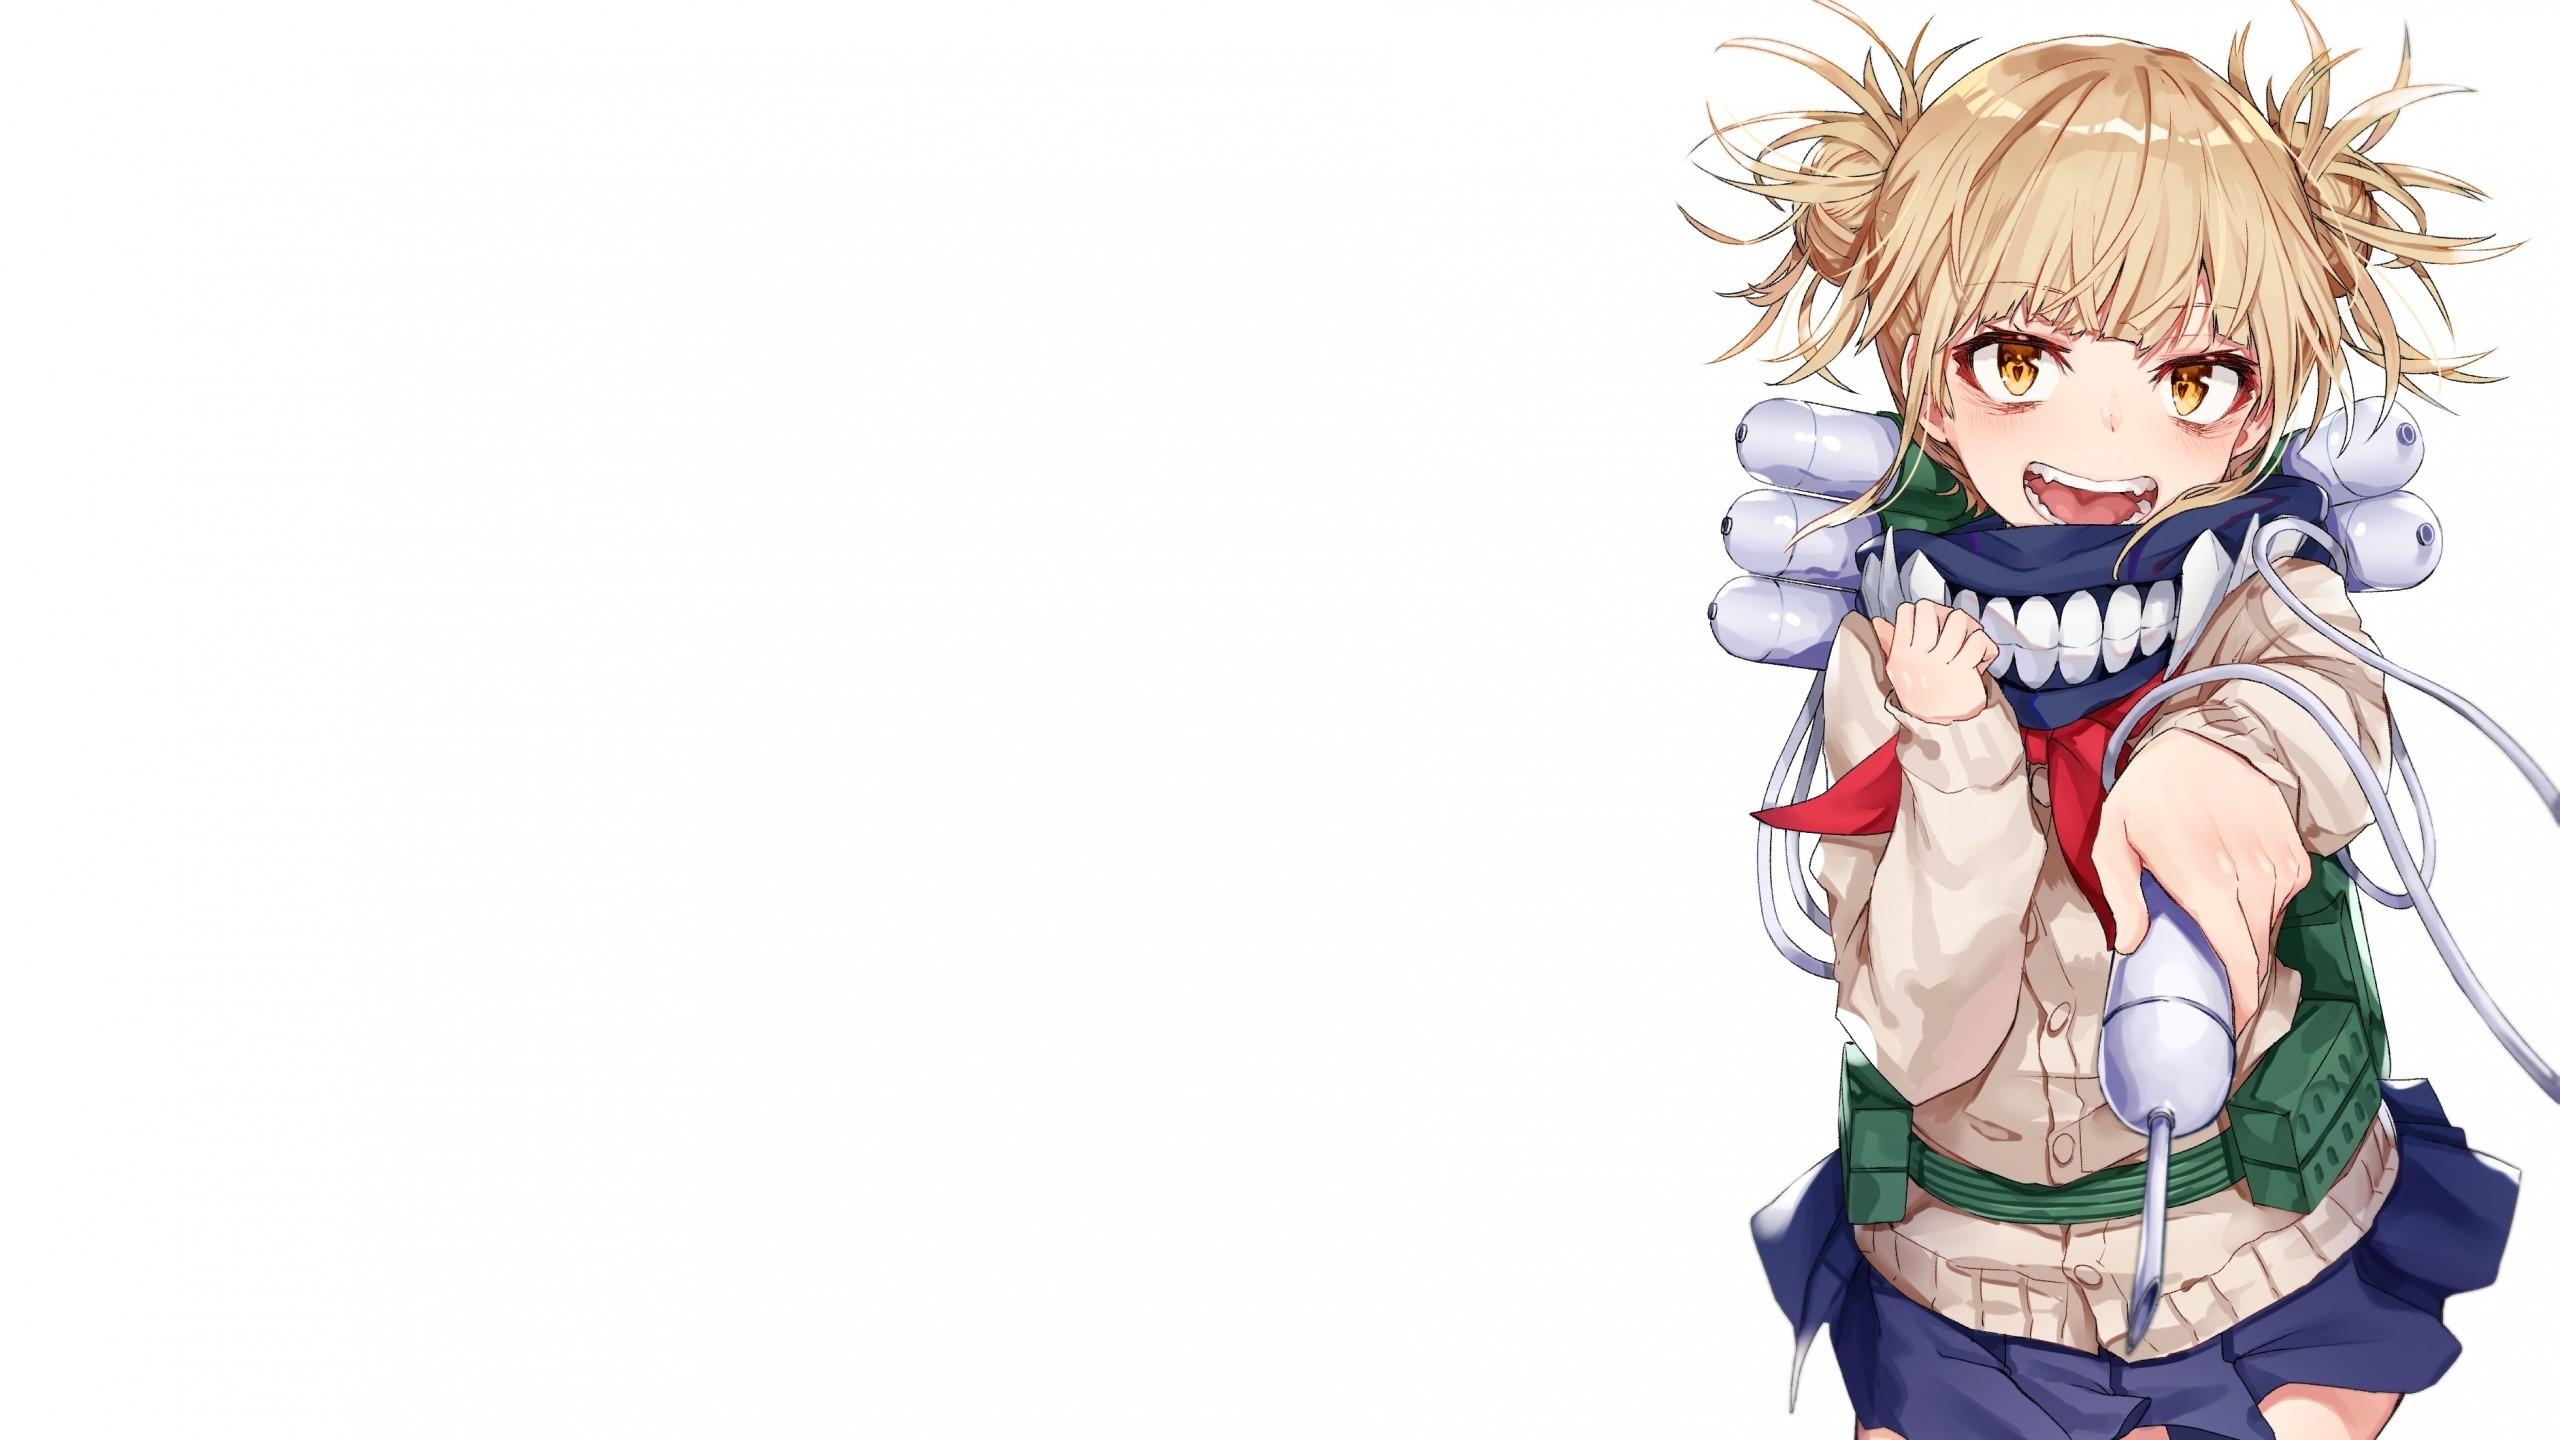 Download 2560x1440 Toga Himiko, Boku No Hero Academia, Blonde, Scarf, Smiling Wallpaper for iMac 27 inch